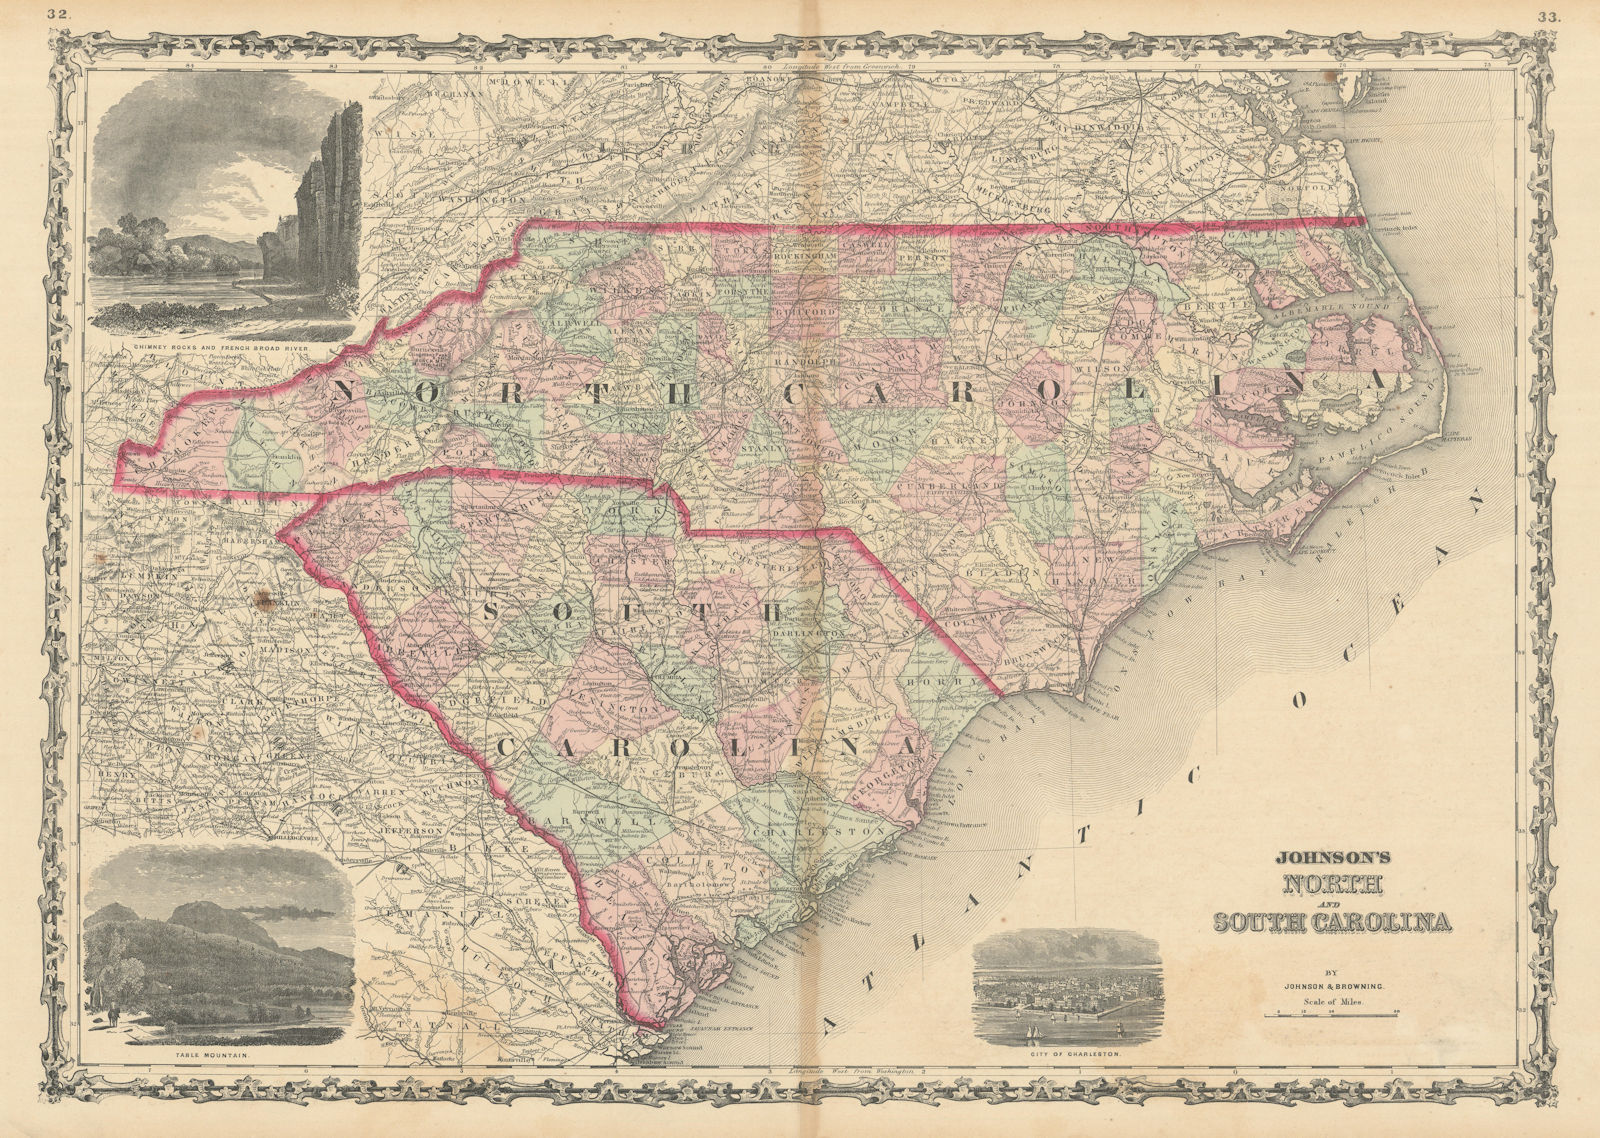 Johnson's North & South Carolina showing counties. US state map 1861 old